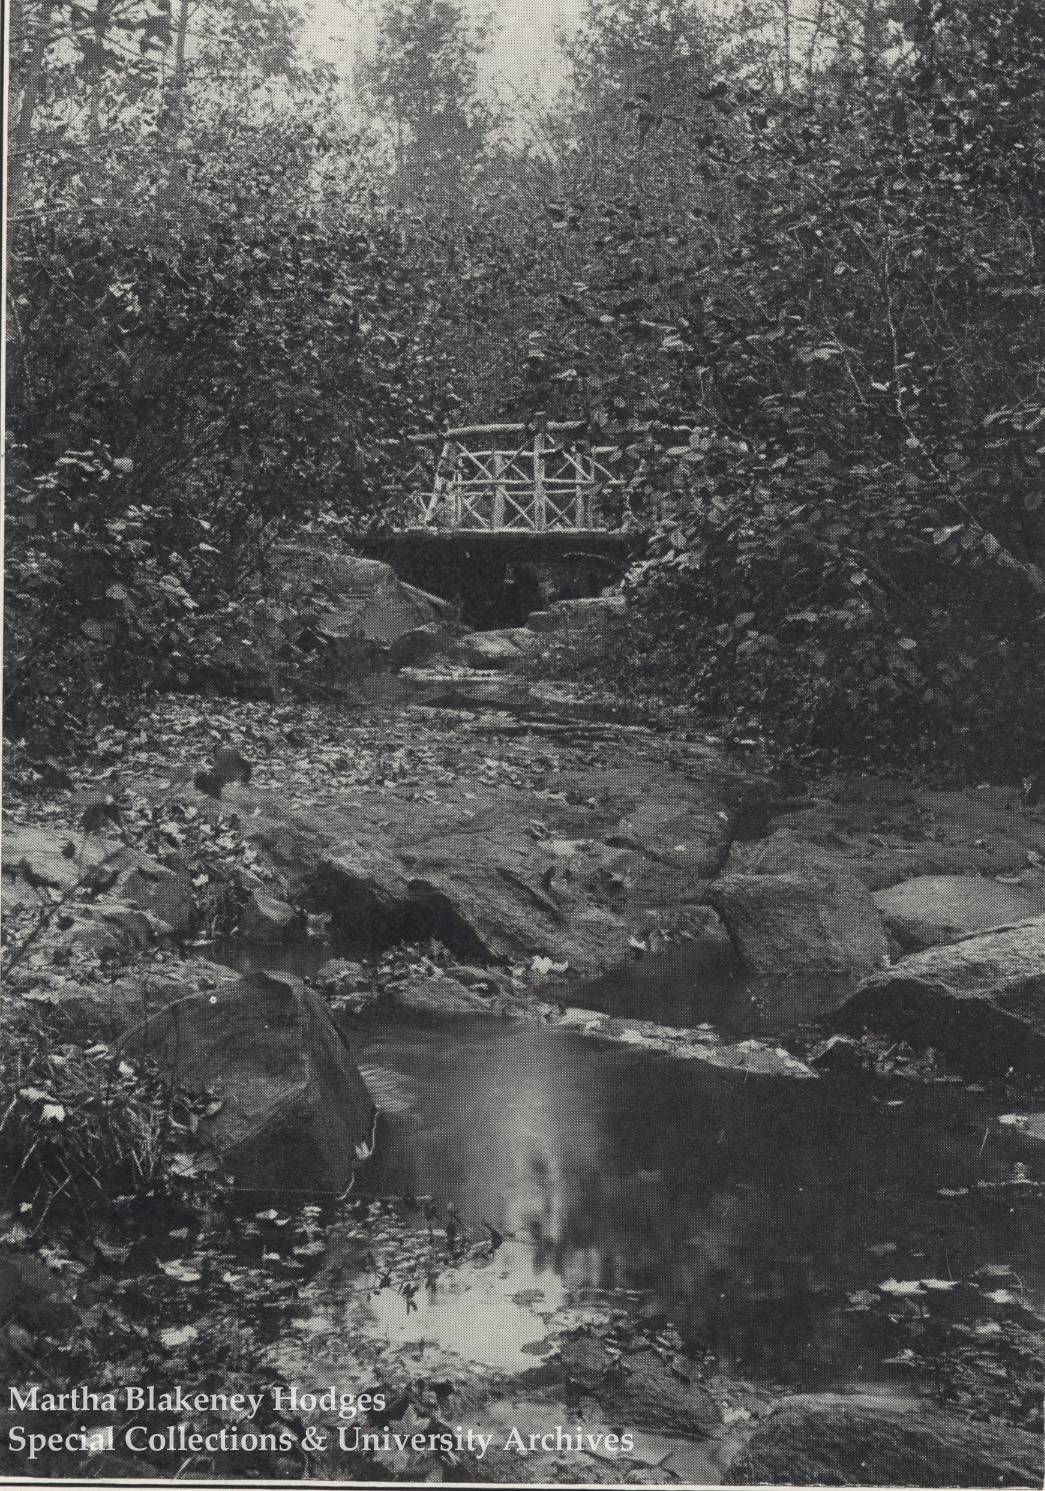 Historical Peabody Park image of a bridge over a stream in Peabody Park.